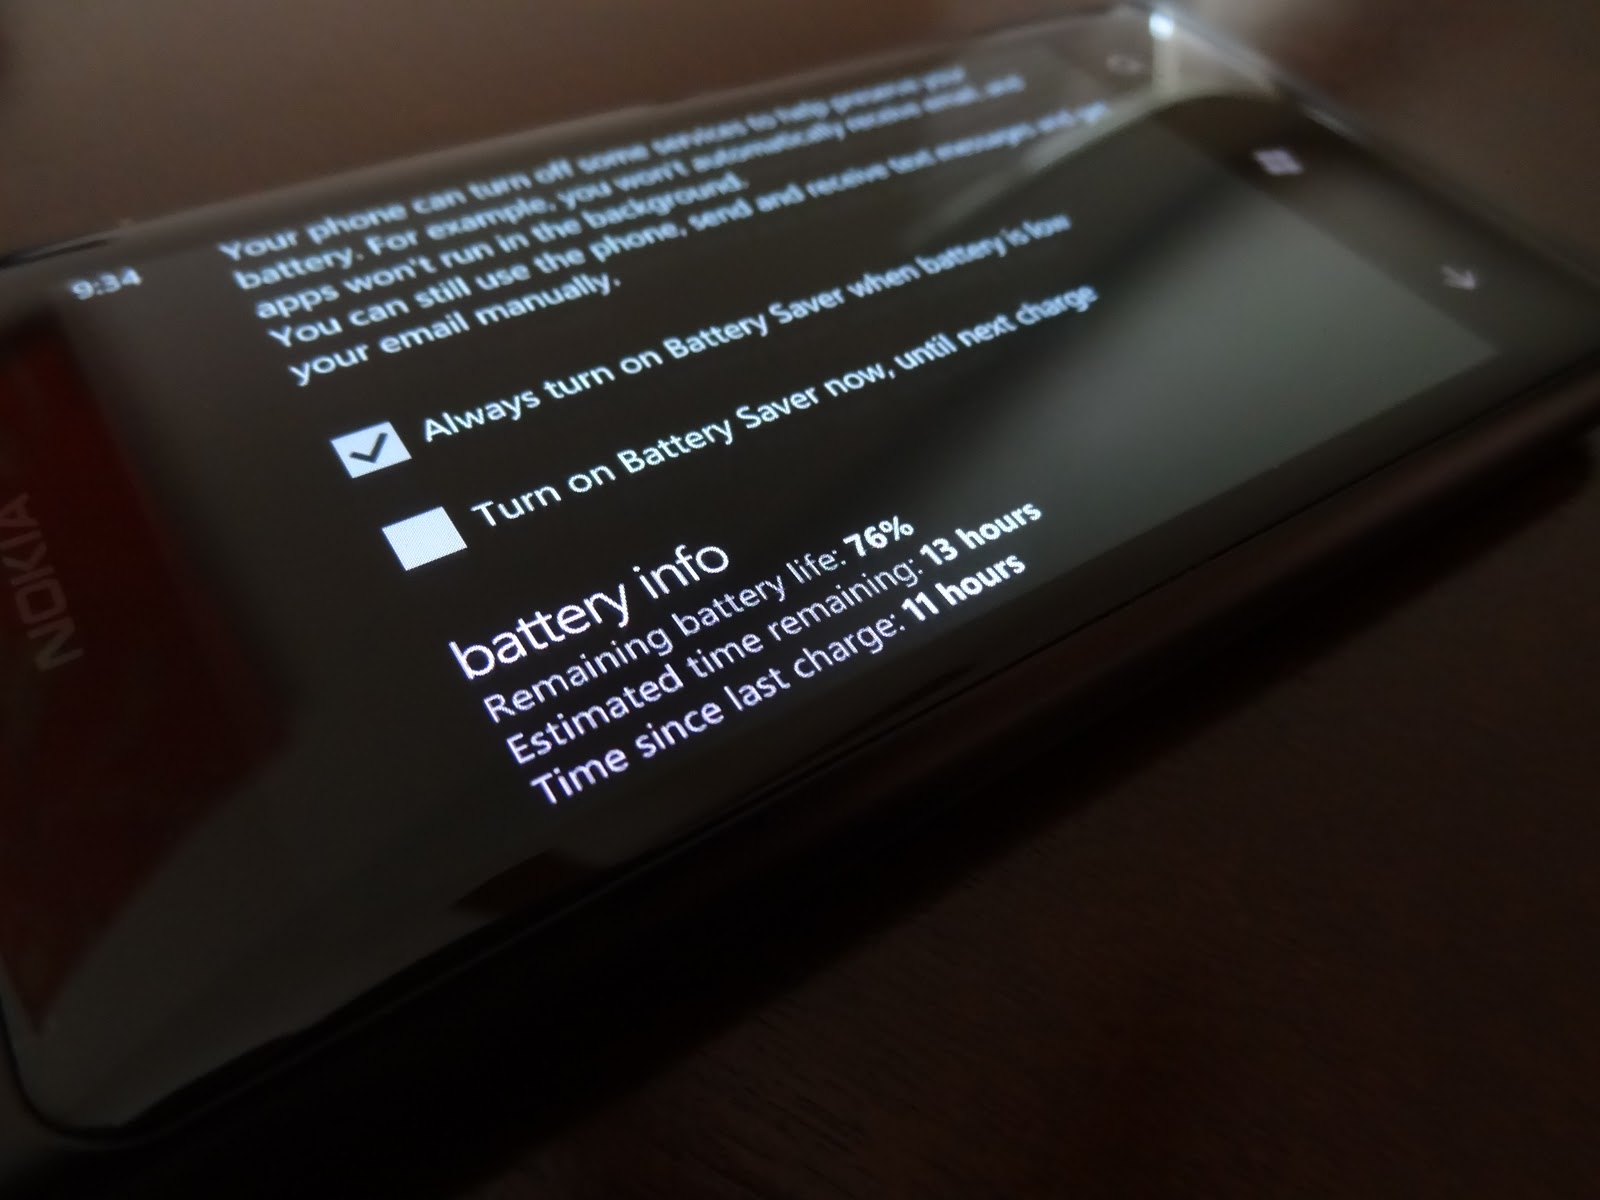 Nokia Lumia 710 Lumia 800 To Get Software Update  Apps Directories